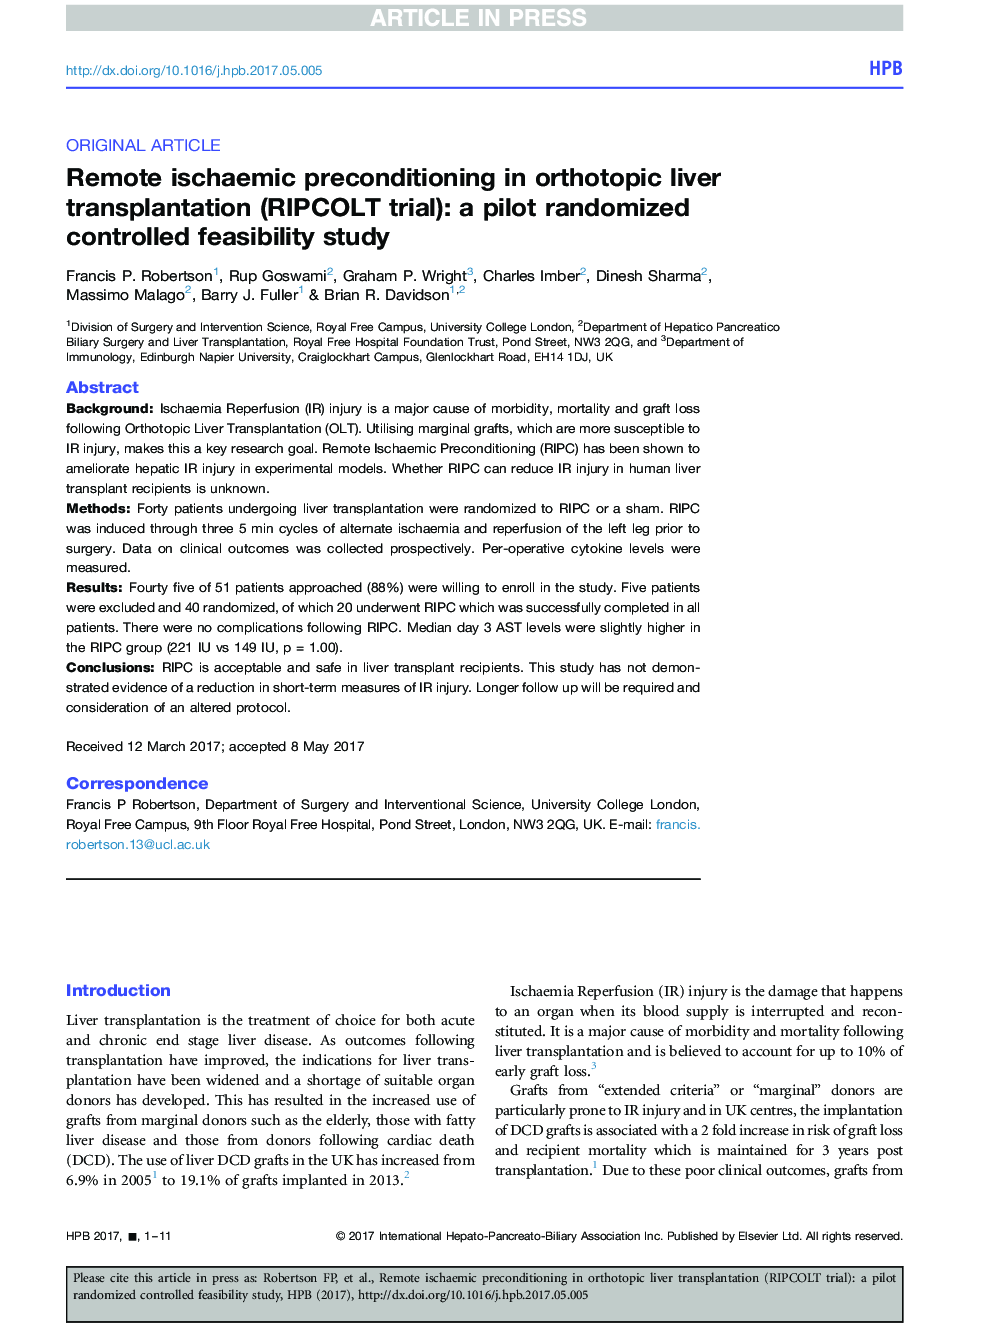 Remote ischaemic preconditioning in orthotopic liver transplantation (RIPCOLT trial): a pilot randomized controlled feasibility study